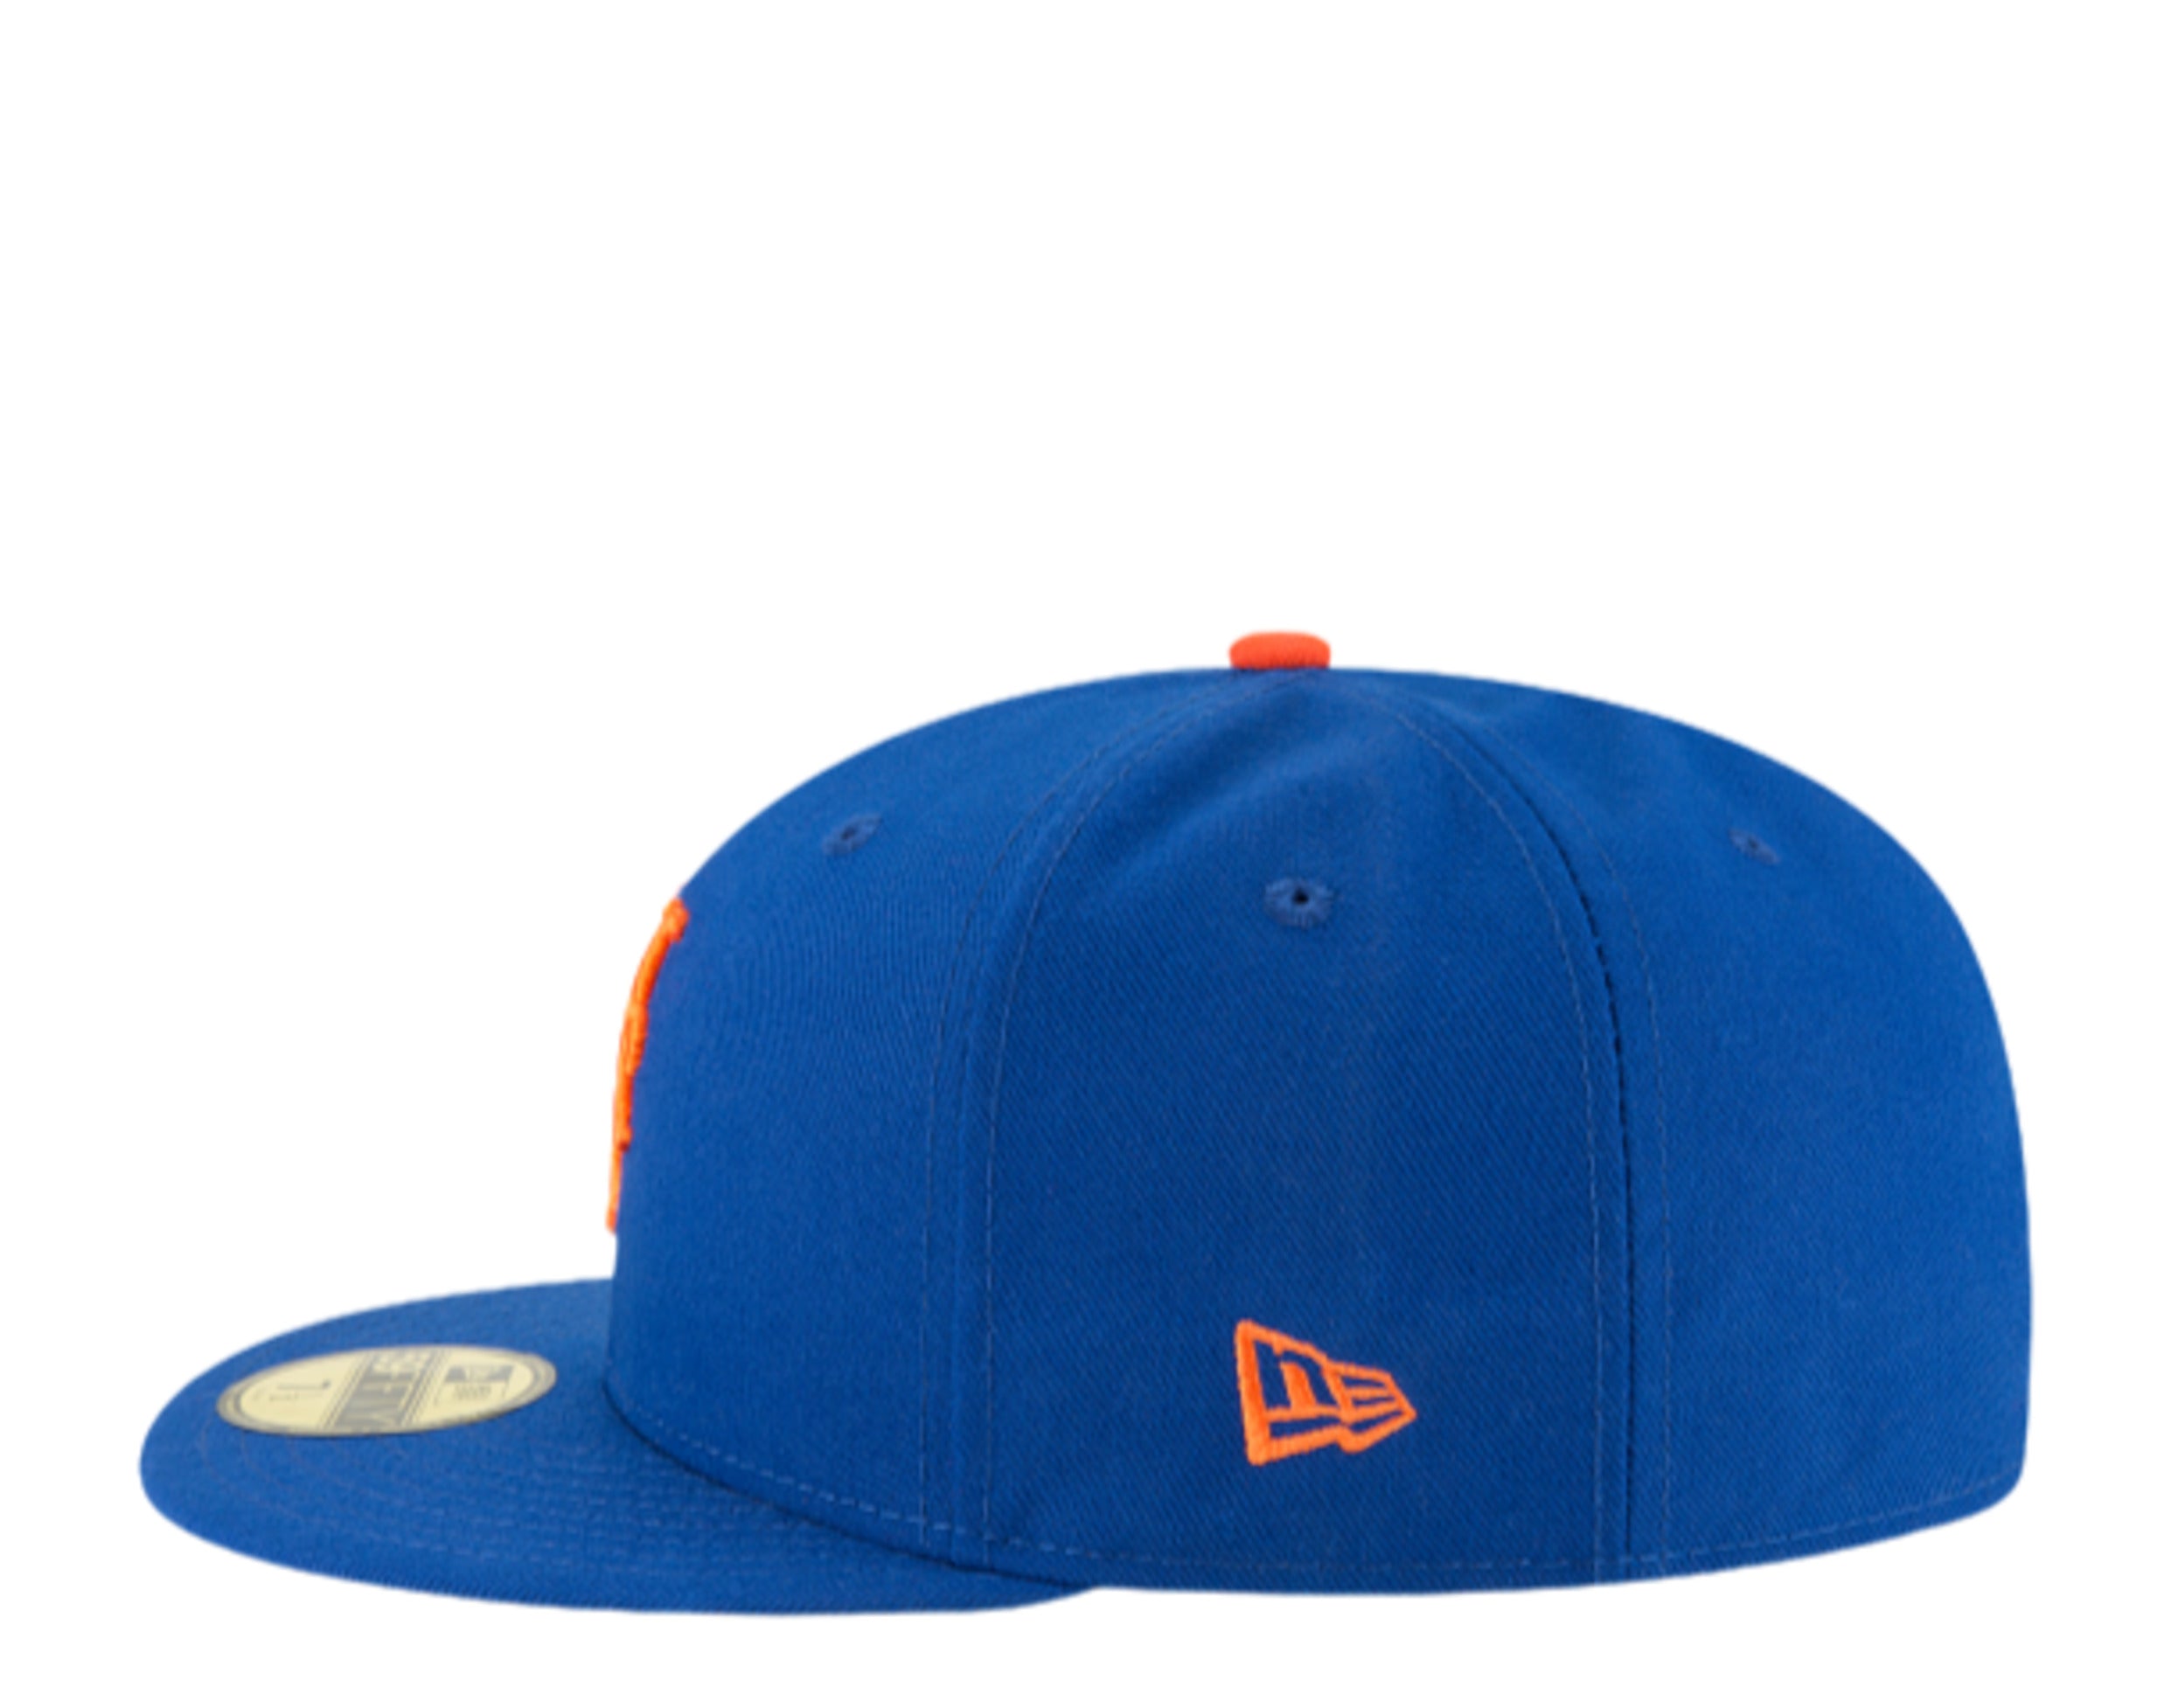 New Era 59FIFTY MLB New York Mets Los Mets Authentic Collection Fitted Hat 7 1/4